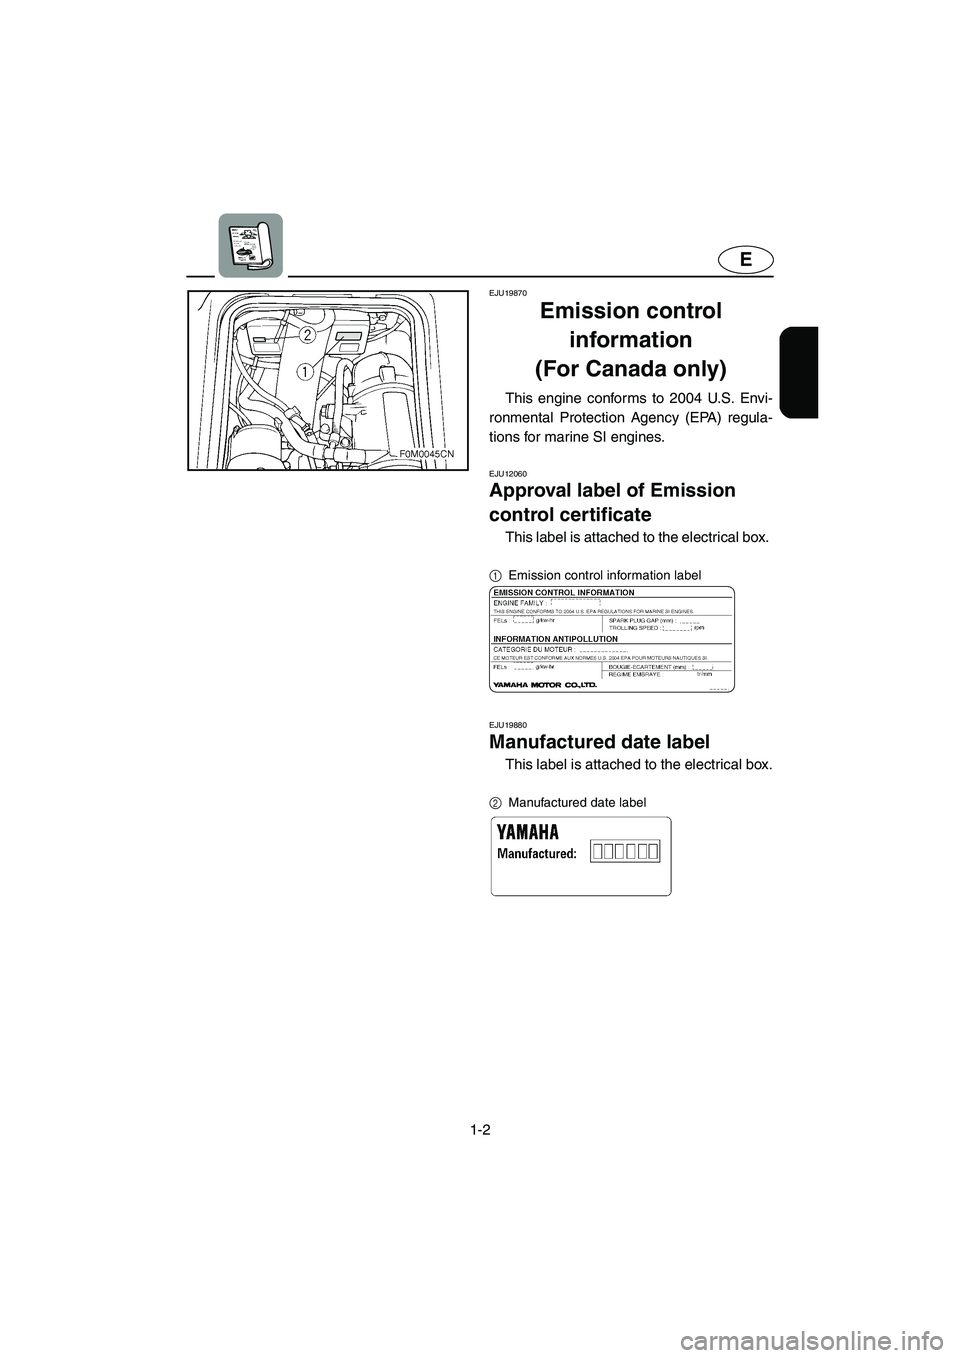 YAMAHA XL 700 2004  Owners Manual 1-2
E
EJU19870
Emission control 
information 
(For Canada only) 
This engine conforms to 2004 U.S. Envi-
ronmental Protection Agency (EPA) regula-
tions for marine SI engines. 
EJU12060 
Approval labe